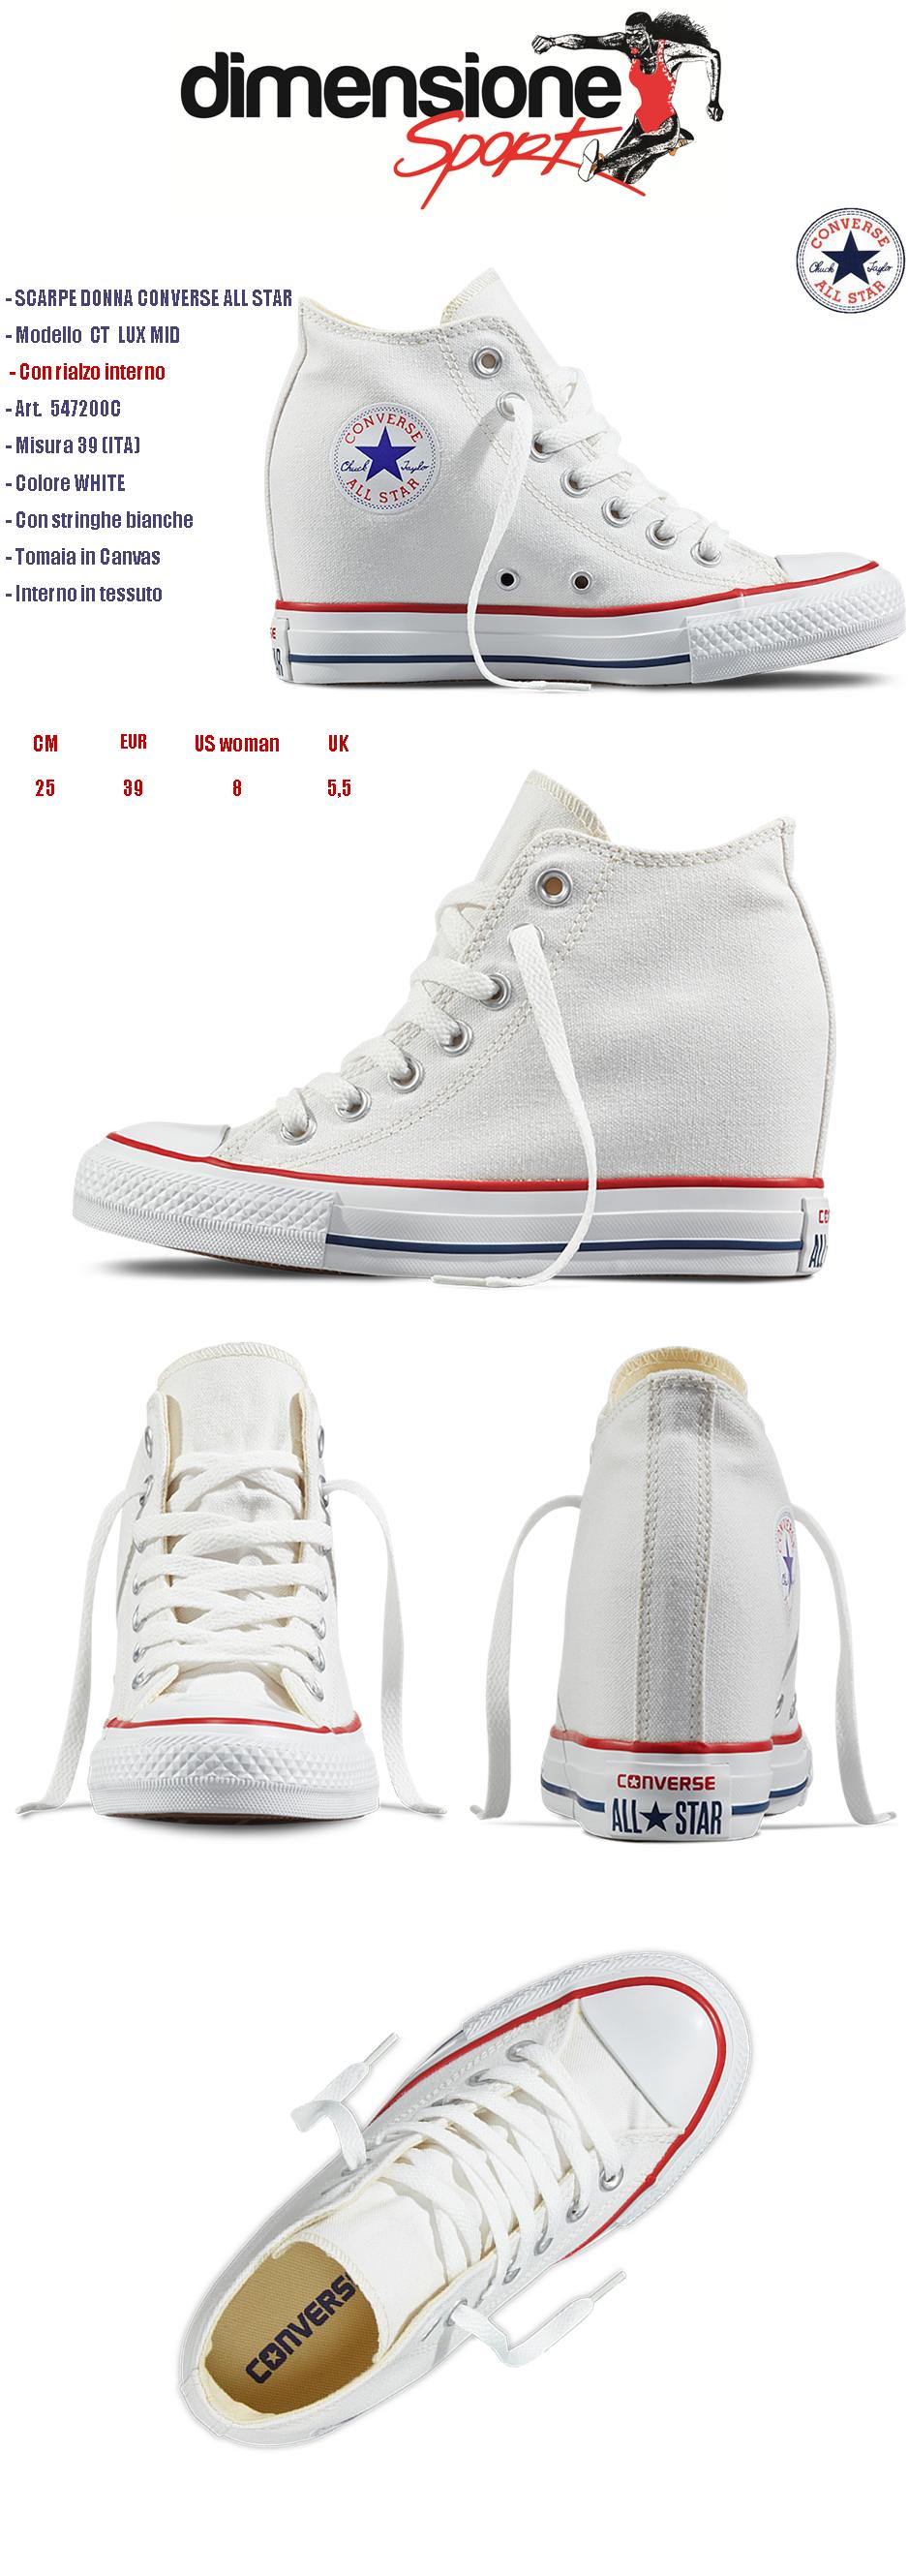 Converse Bianche Alte Con Rialzo on Sale, UP TO 59% OFF | www ... شعار جي ام سي